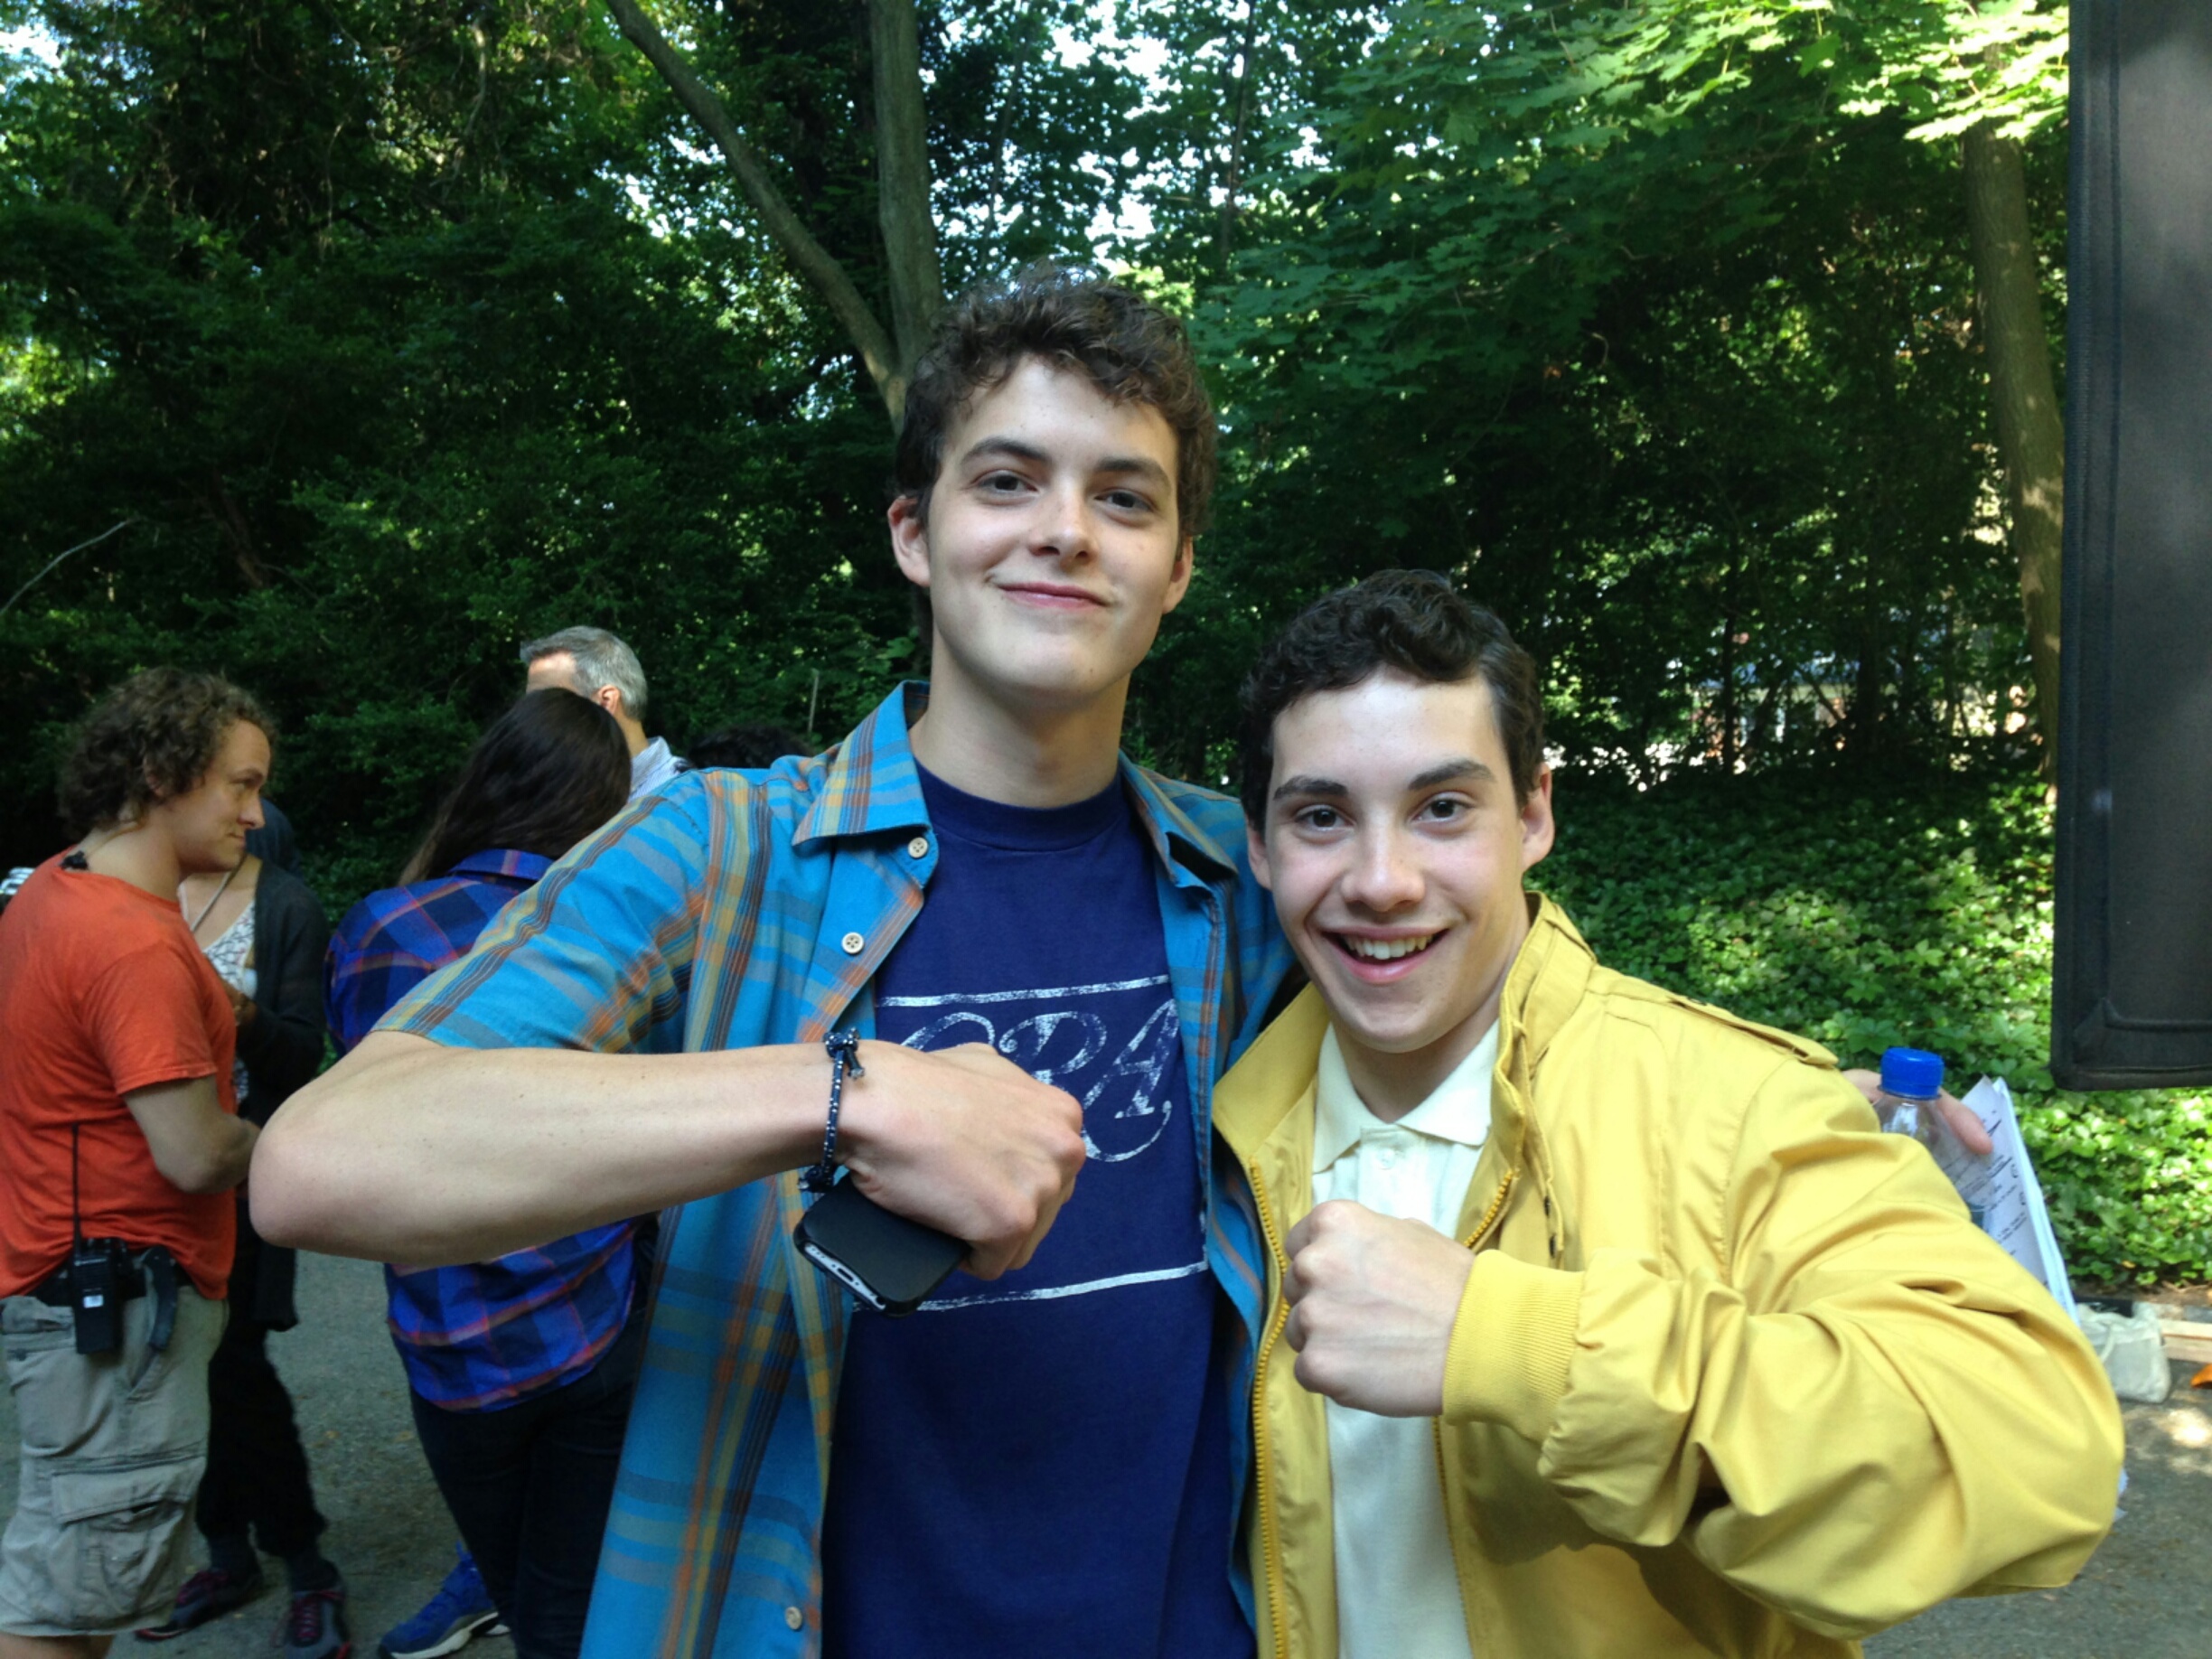 John D'Leo with actor Israel Broussard on the set of 